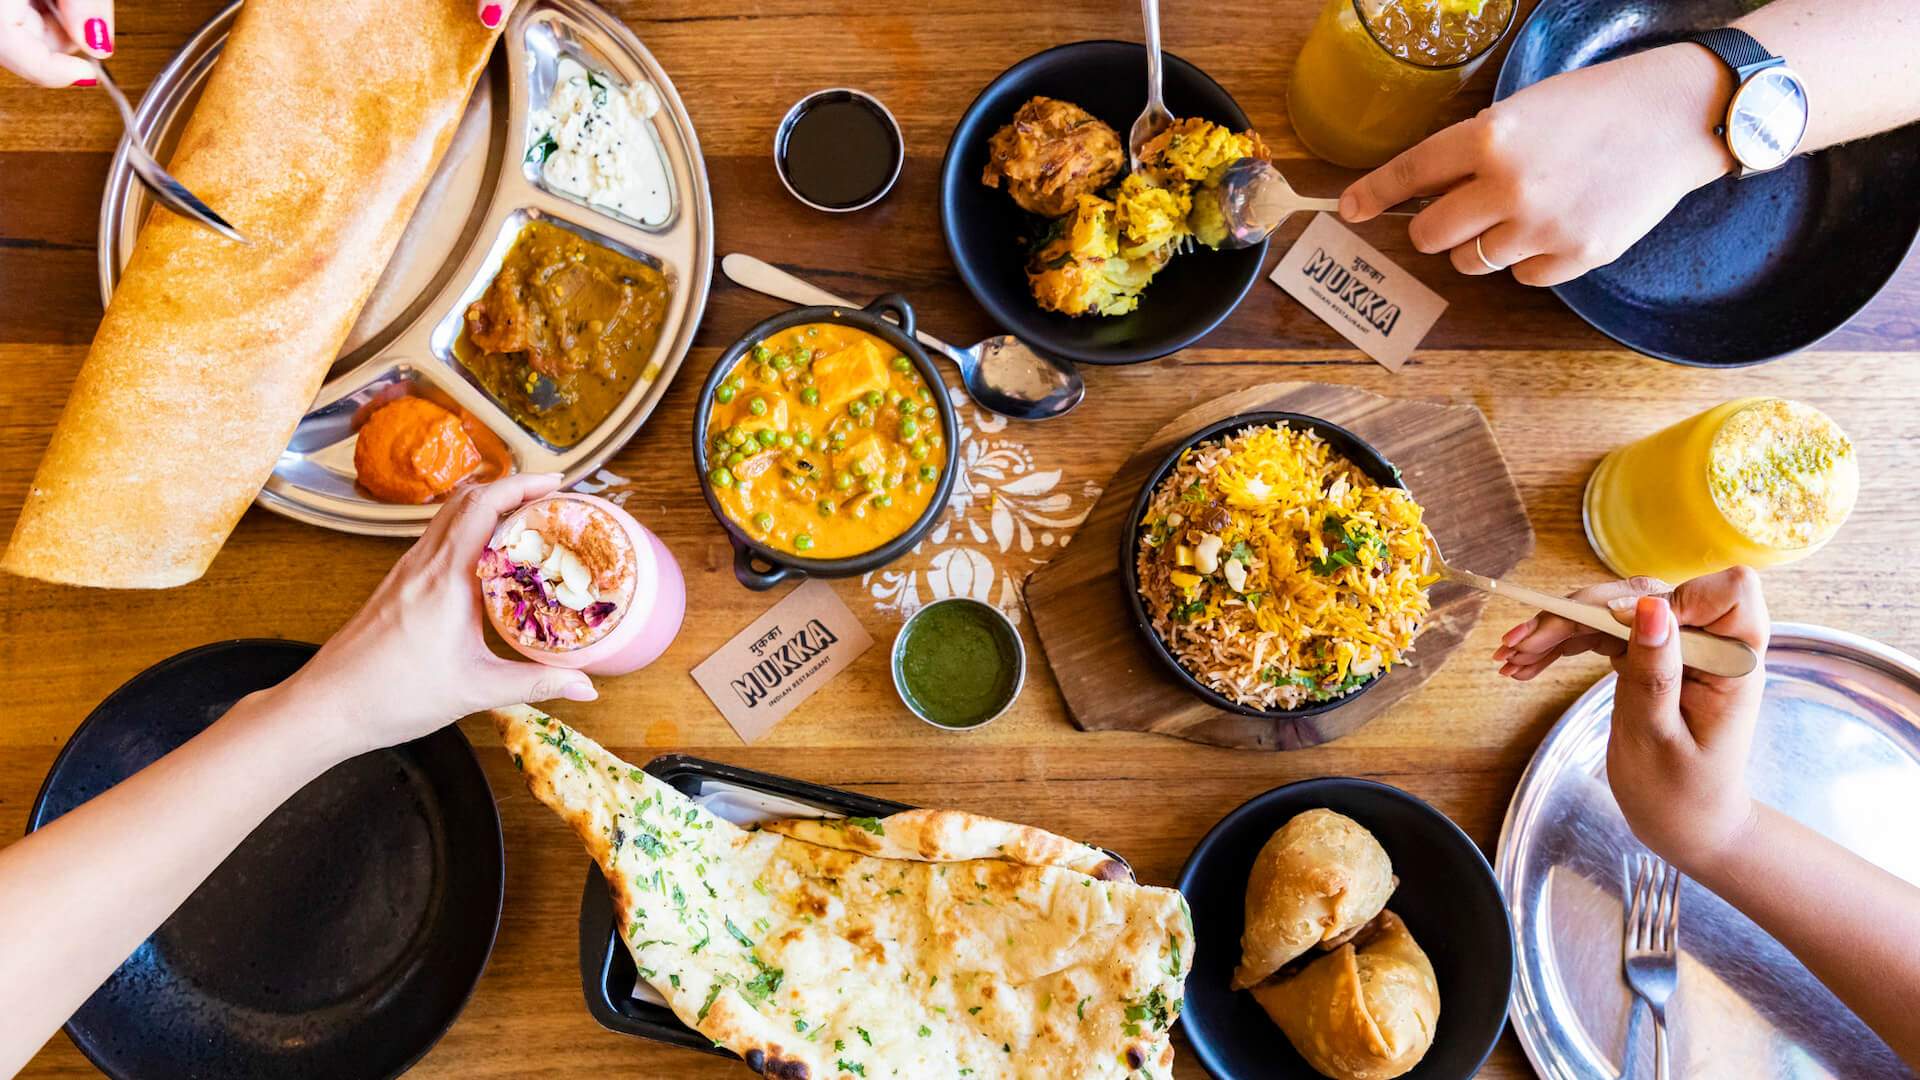 Mukka Is Taking Its Much-Loved Dosas and Incredibly Cheesy Naan to an Even Bigger Location